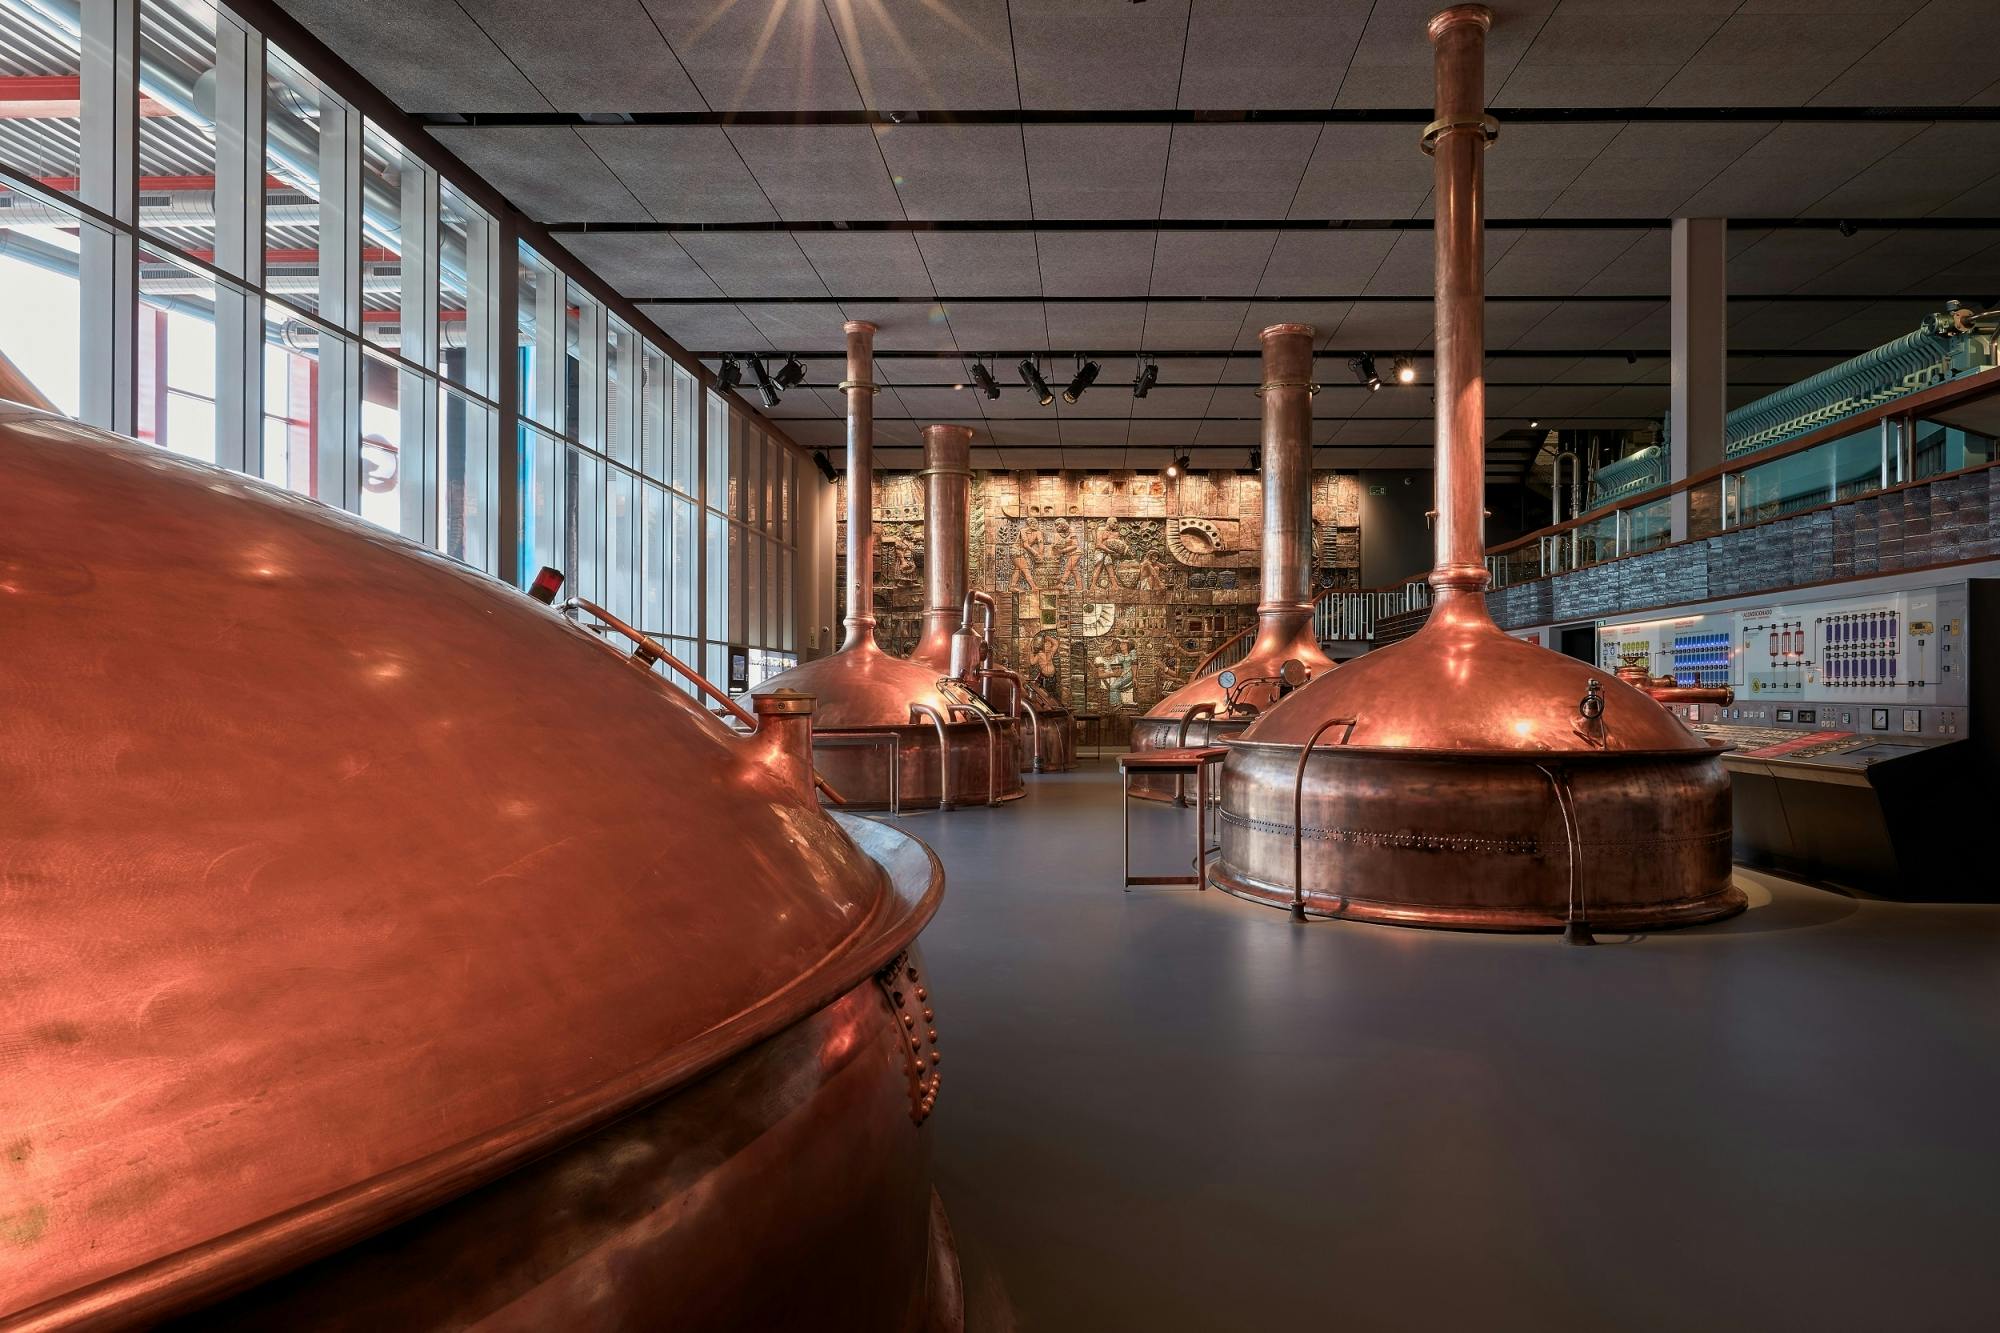 Estrella Galicia Museum guided tour with beer and cured meat tasting Musement